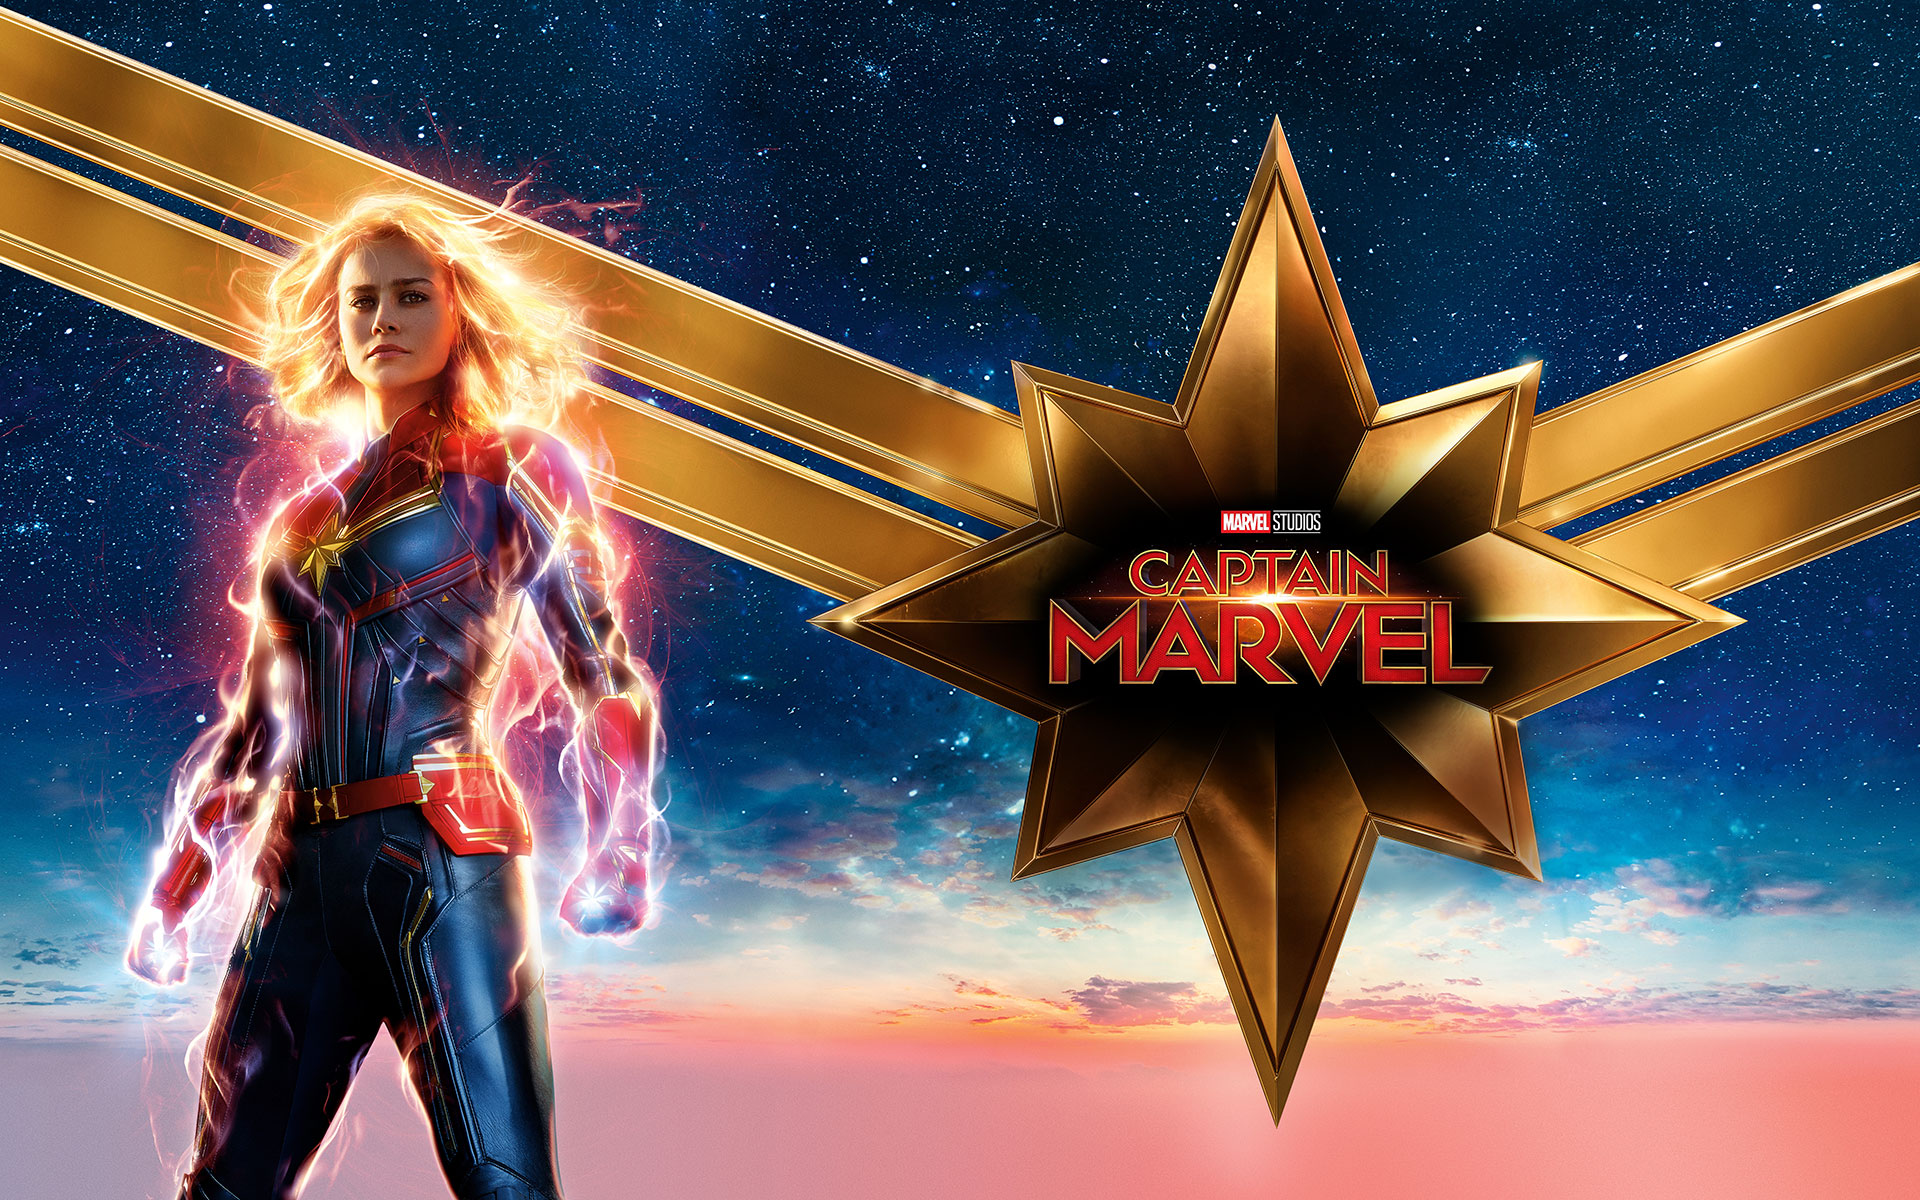 Captain Marvel Movie 2019 Wallpapers Hd Cast Release Date Images, Photos, Reviews